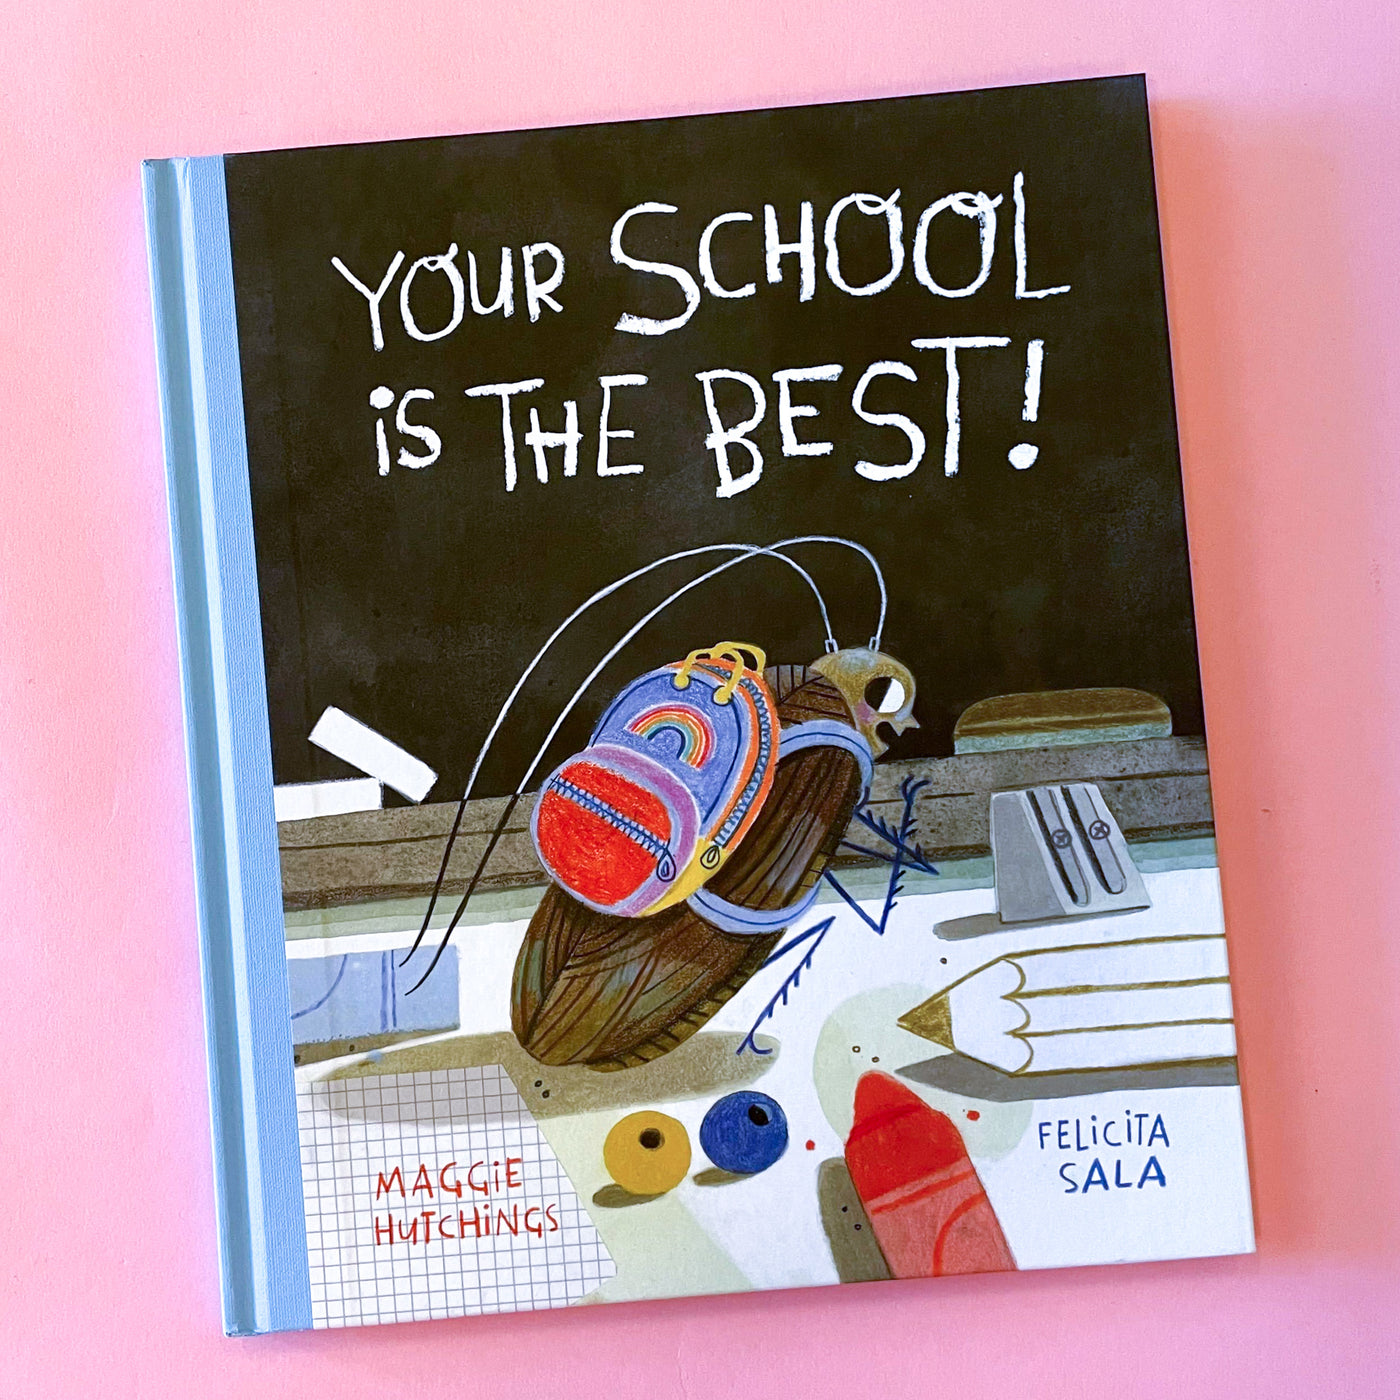 Your School Is the Best! by Maggie Hutchings and Felicita Sala